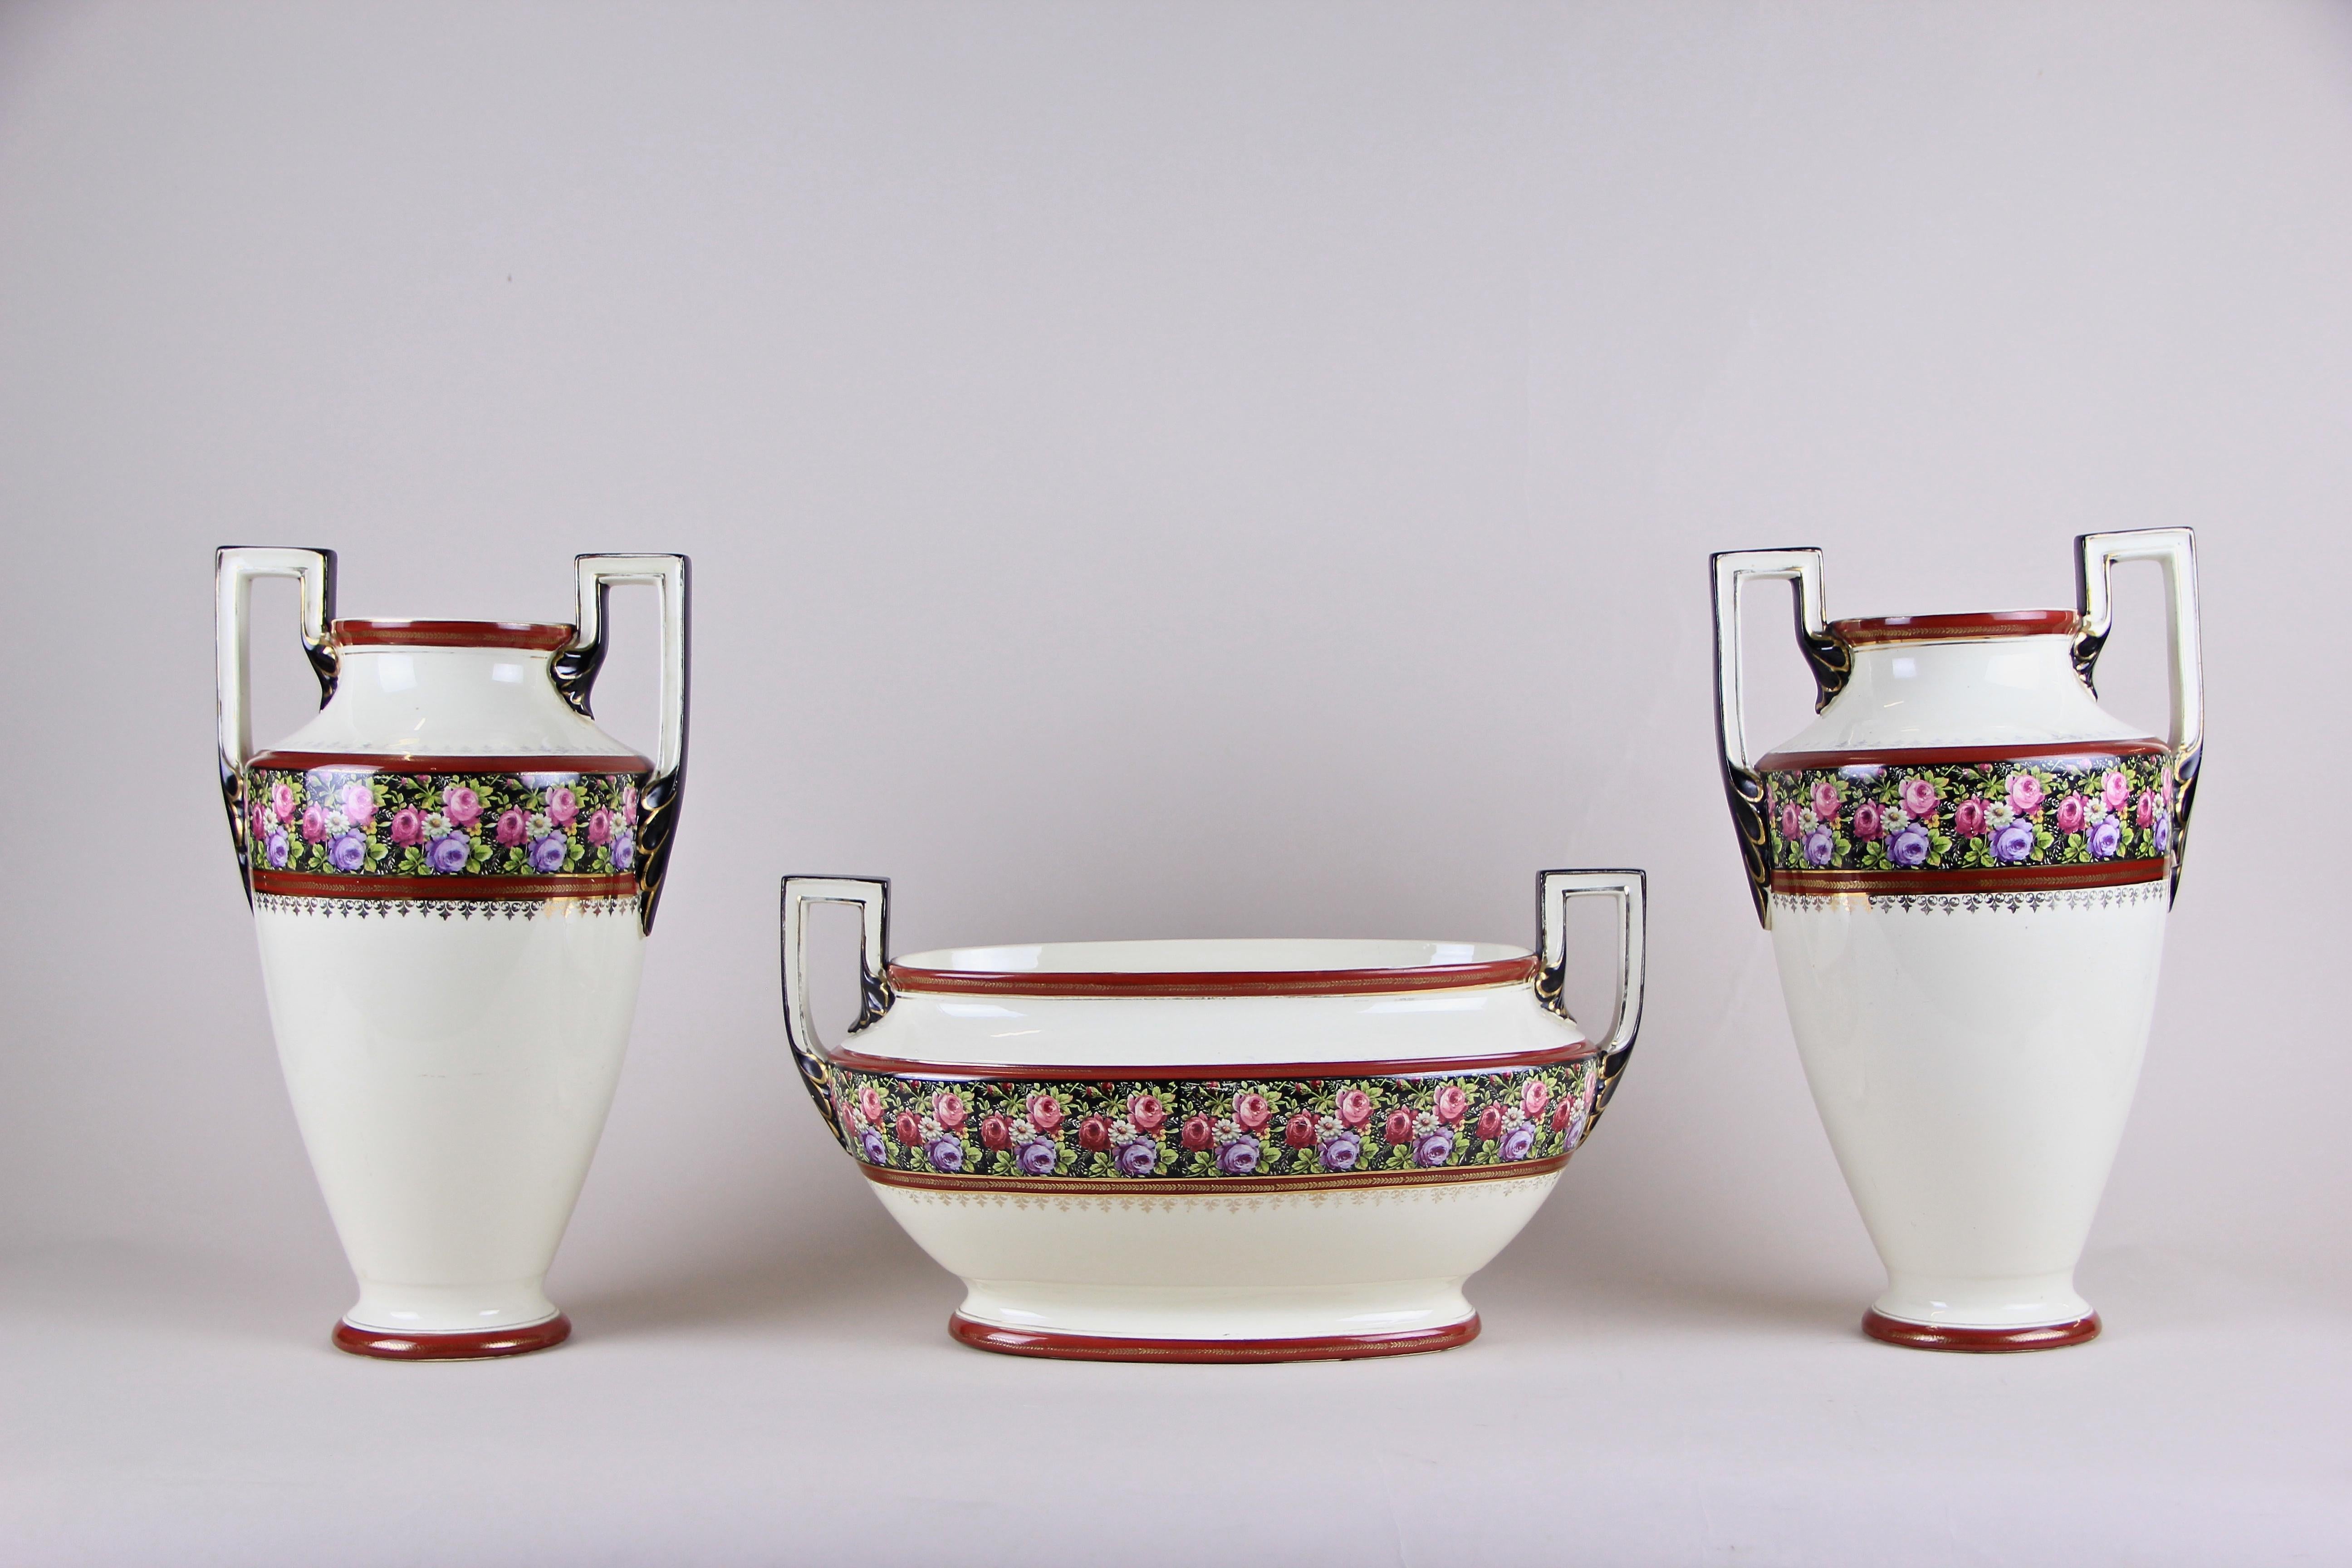 Lovely French ceramic garniture from circa 1910. This Art Nouveau set consists of five pieces including two large beautiful designed Amphora vases, a jardinière and two small straight vases. Nice flower designs adorn all pieces in this great